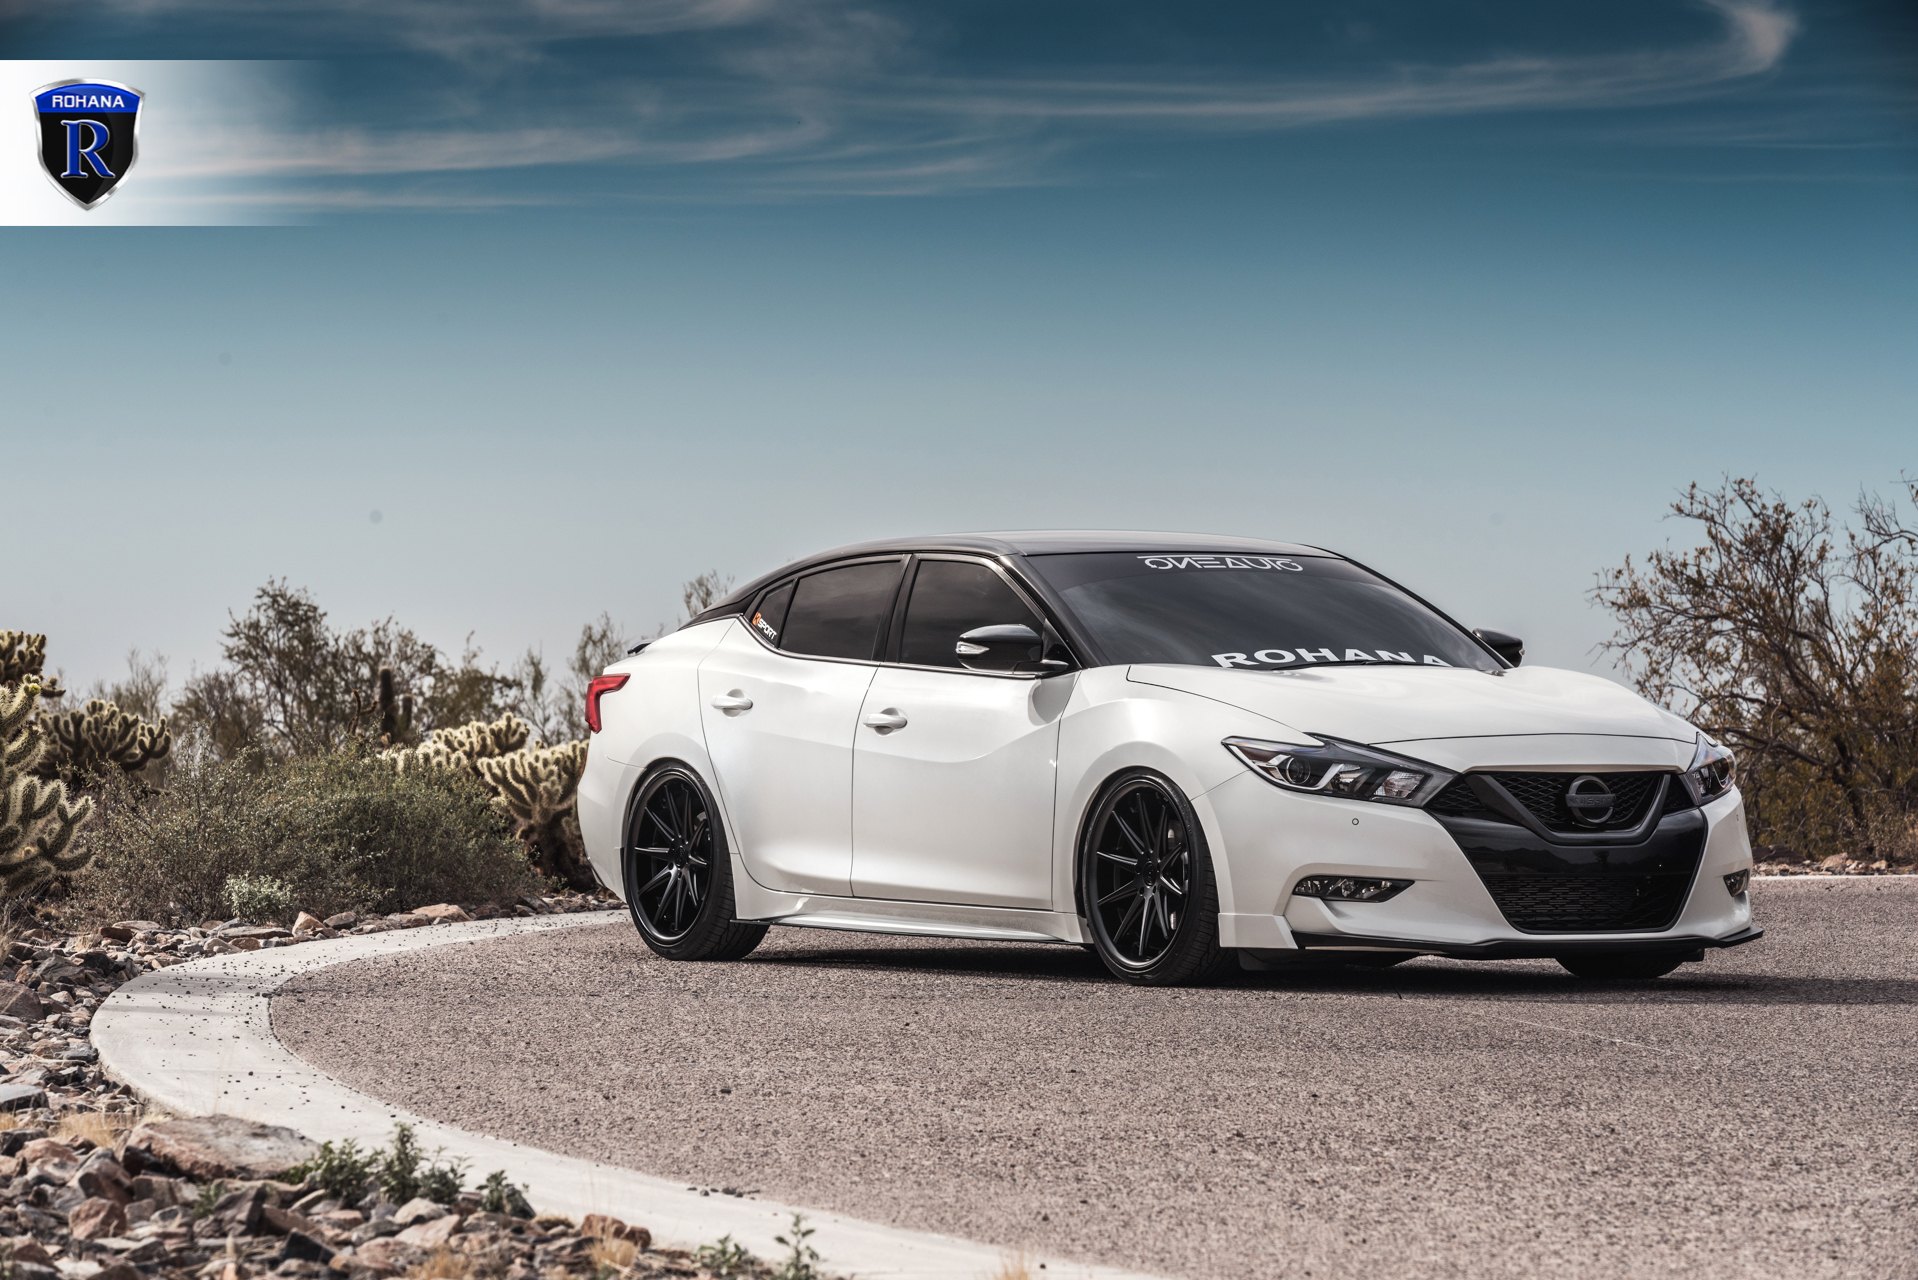 White Nissan Maxima with Blacked Out Mesh Grille - Photo by Rohana Wheels